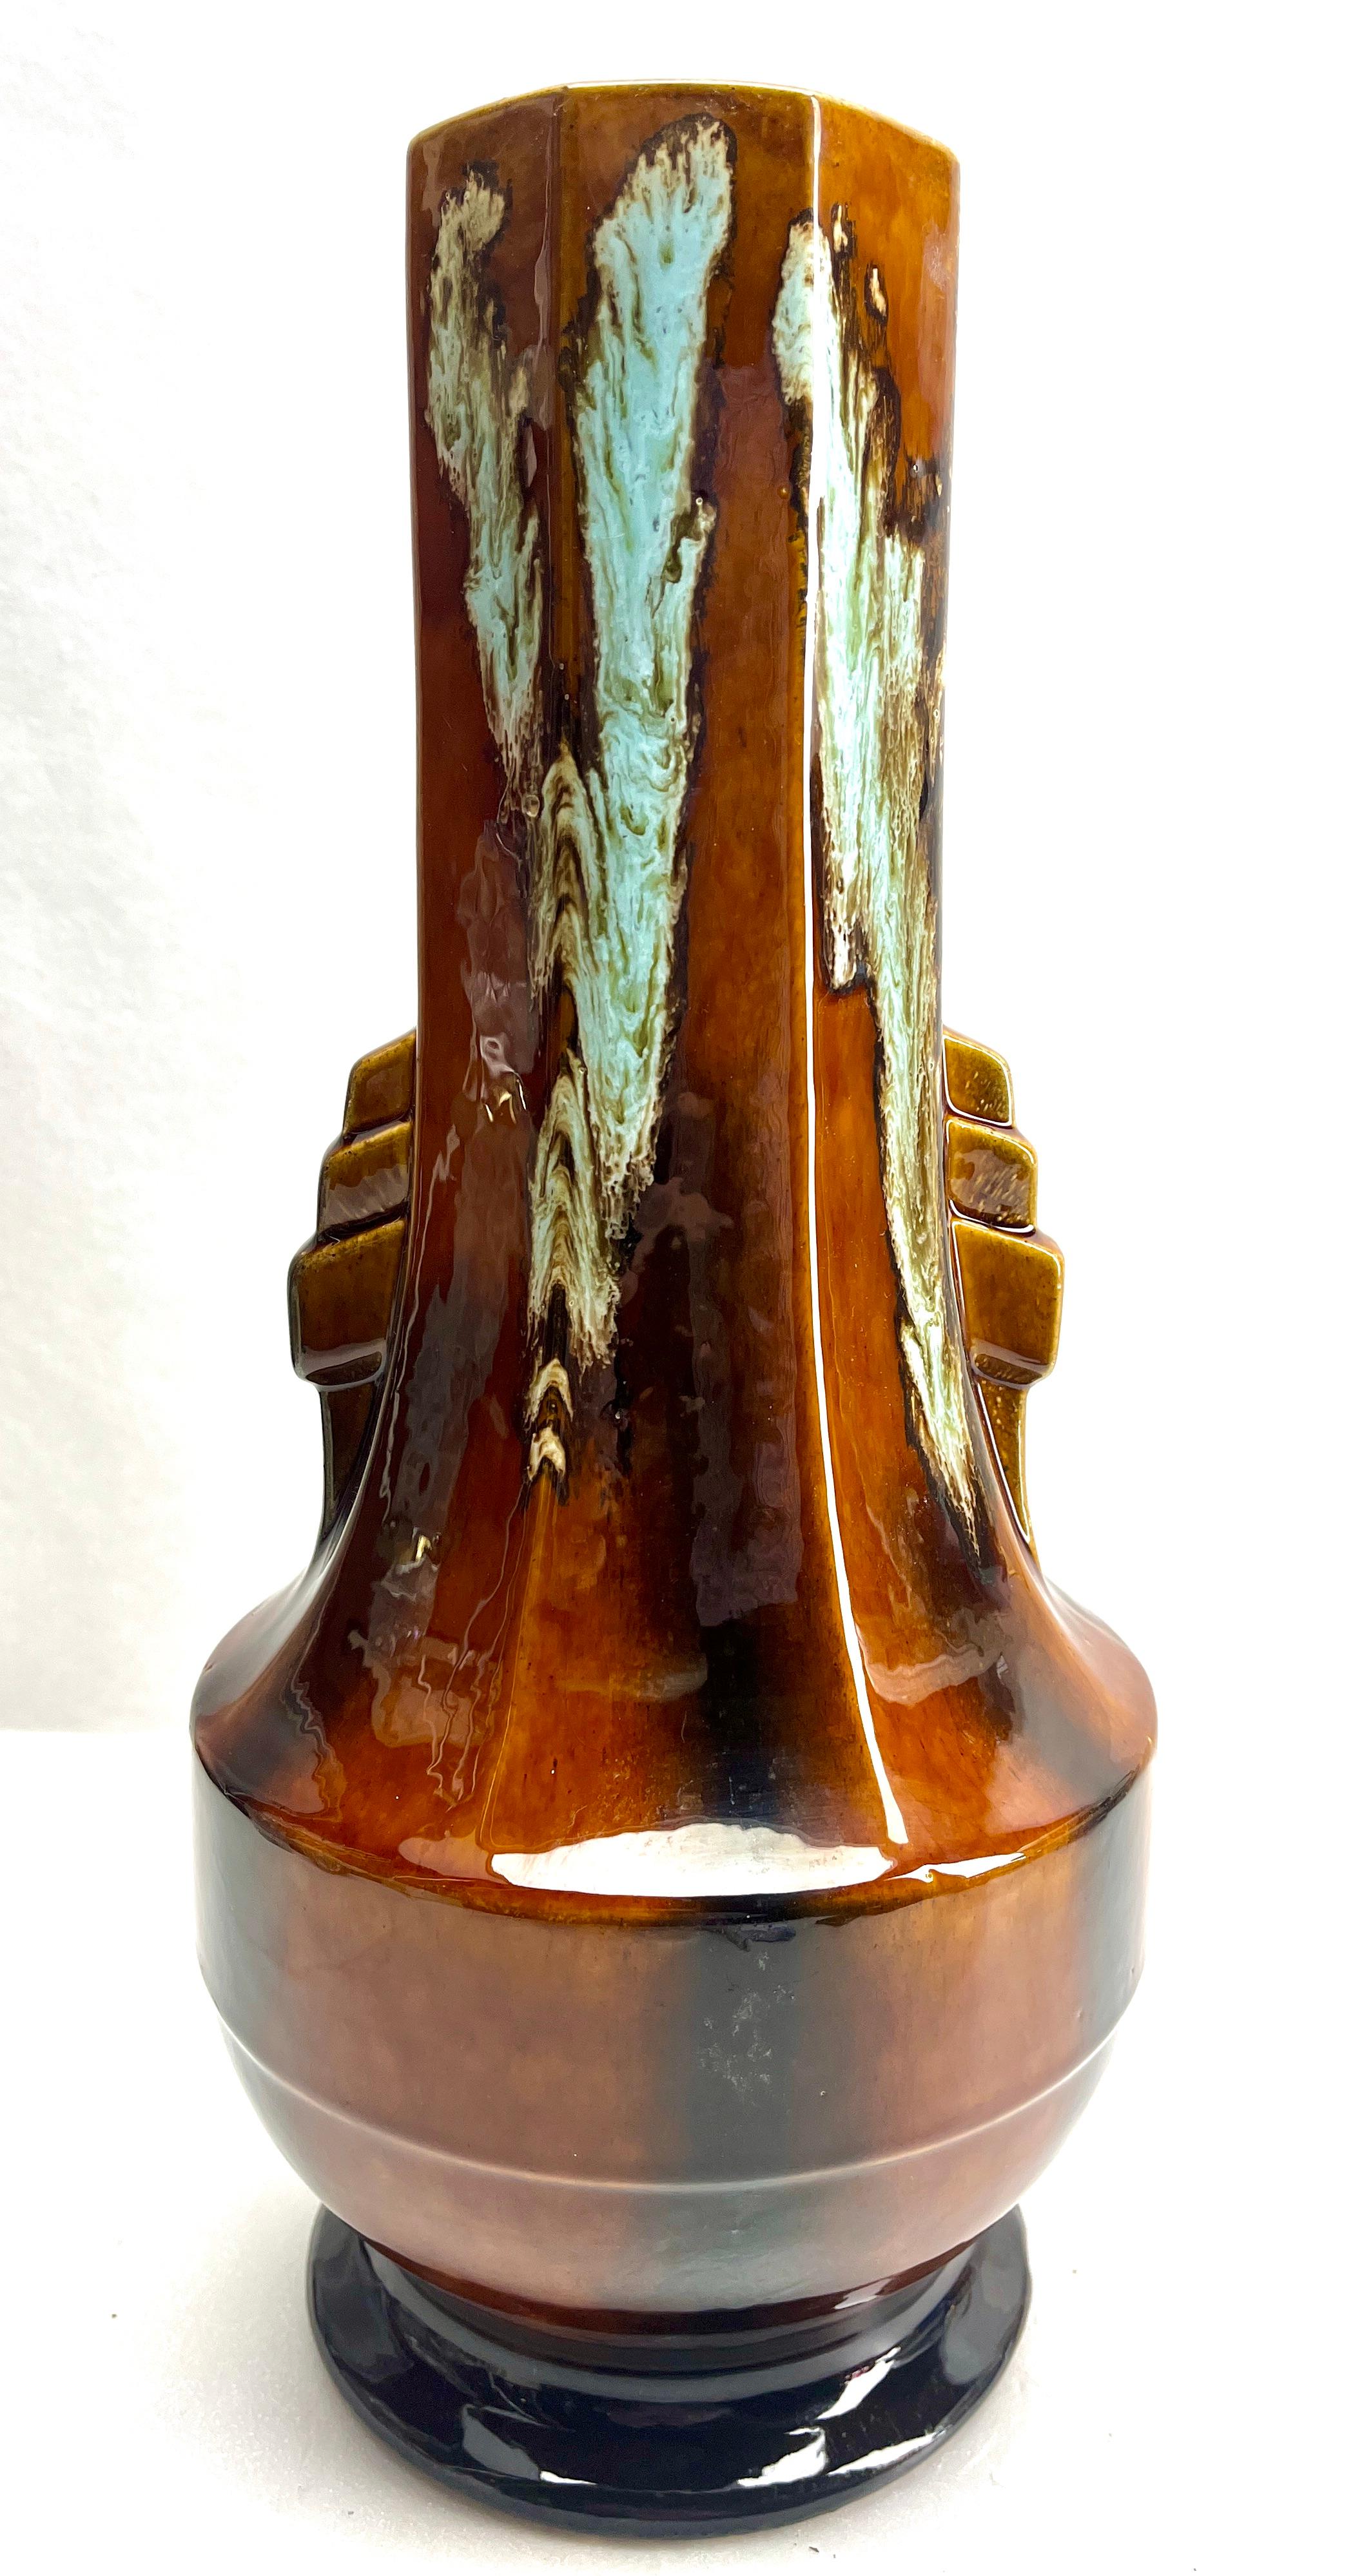 Art Nouveau Art Deco earthenware vase,  made in Belgium. 1930s
Model F-42
Art Nouveau ceramic vase in excellent condition (no crack, no repair to the ceramic).
There are 4 pieces Available in different colors
 
Size: Height 37 cm  Diameter